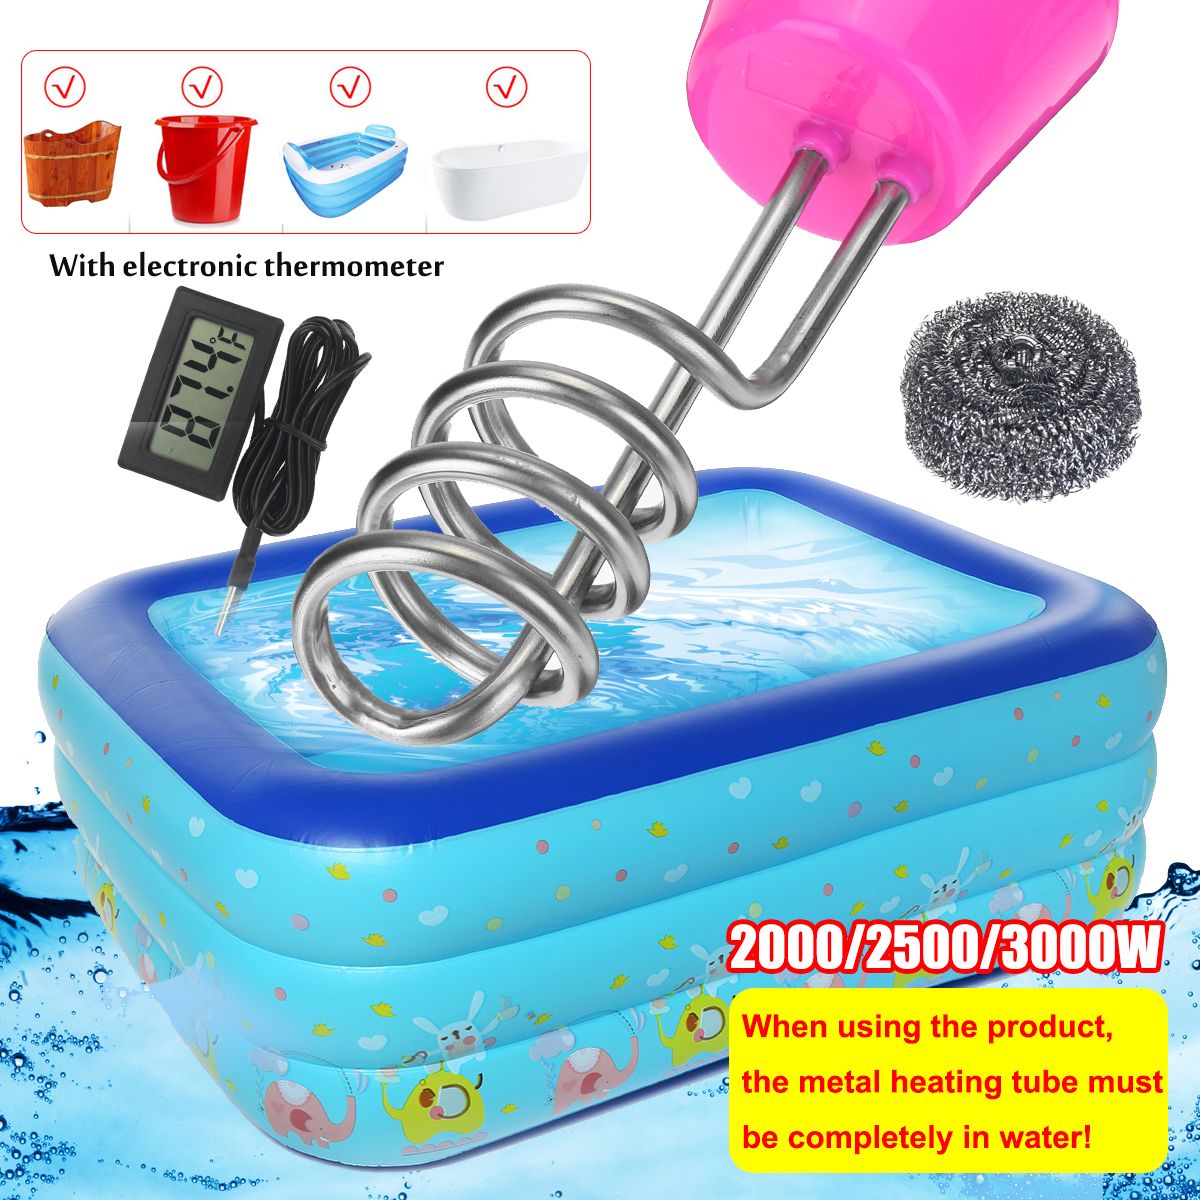 New-3000W-2000W-Bathtub-Pool-Suspension-Float-Water-Heater-With-Thermometer-1711425